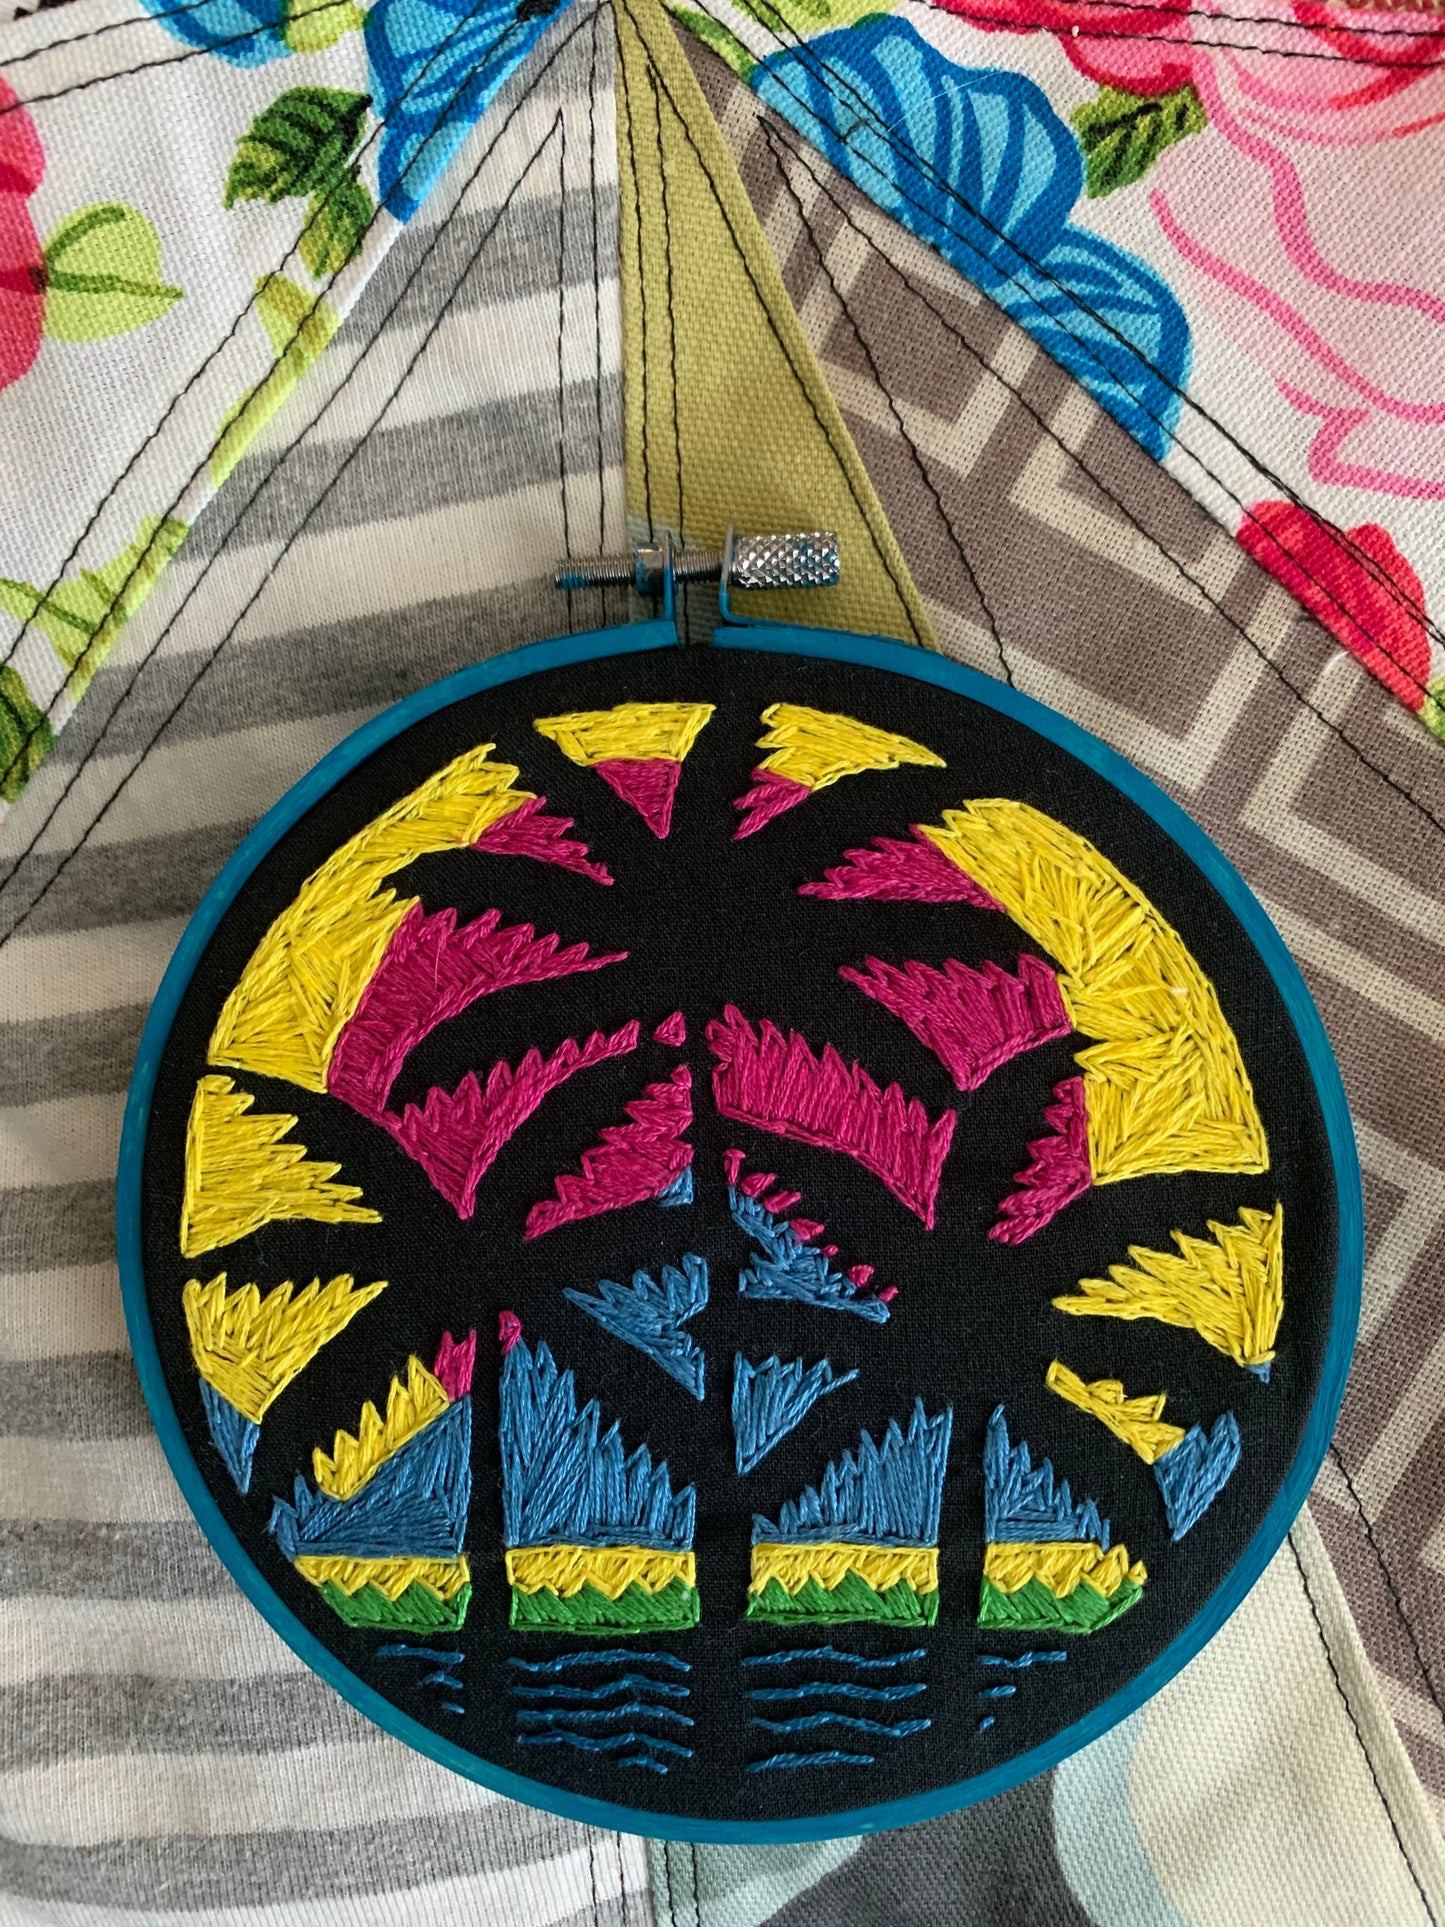 embroidery hoop with vibrant neon colors, art inspired by Blaqk Audio Beneath the Black Palms album art